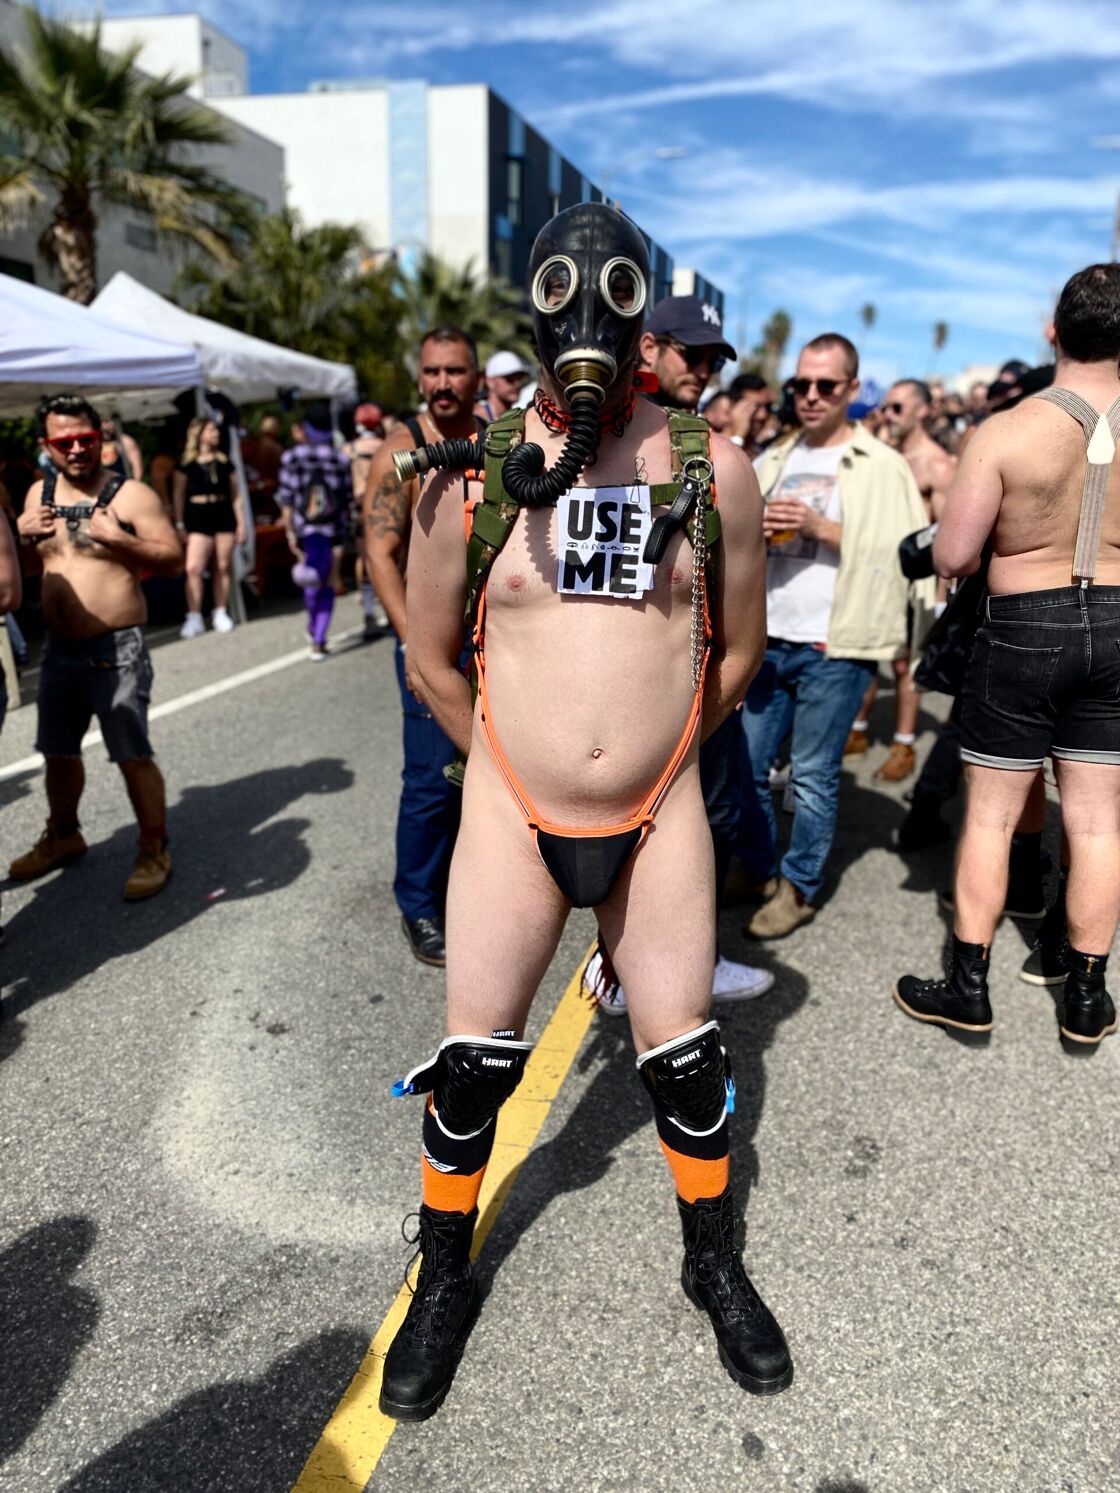 A fetishist in a gas mask.